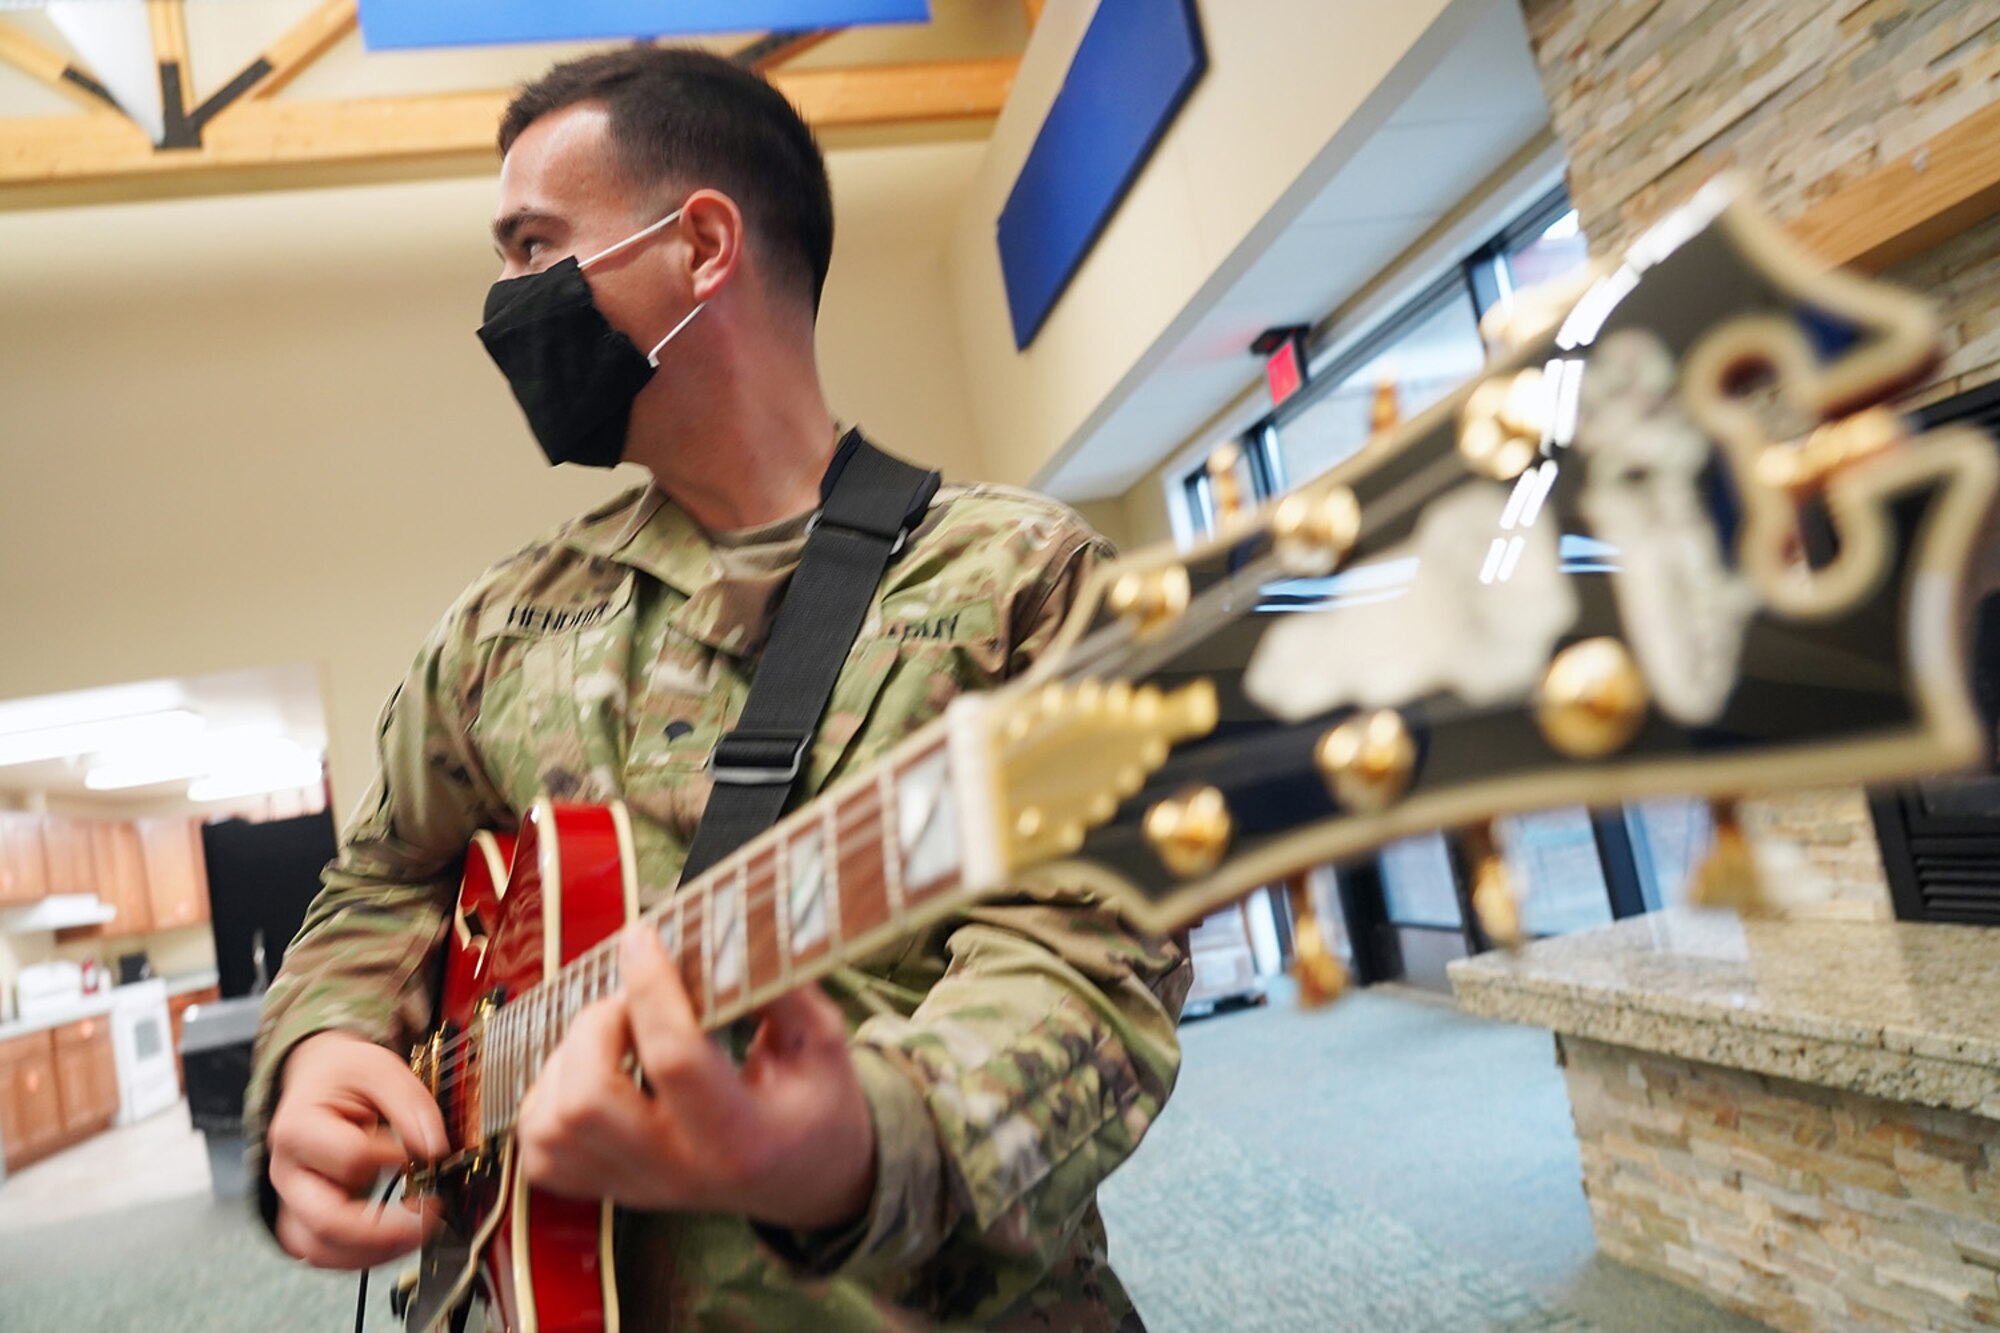 Army Spc. William Hendrix, a native of Greenville, SC, a guitarist assigned to the 9th Army Band, 17th Combat Sustainment Support Battalion, U.S. Army Alaska, rehearses in an open room at his unit headquarters on Joint Base Elmendorf-Richardson, Alaska, Sept. 17, 2020.